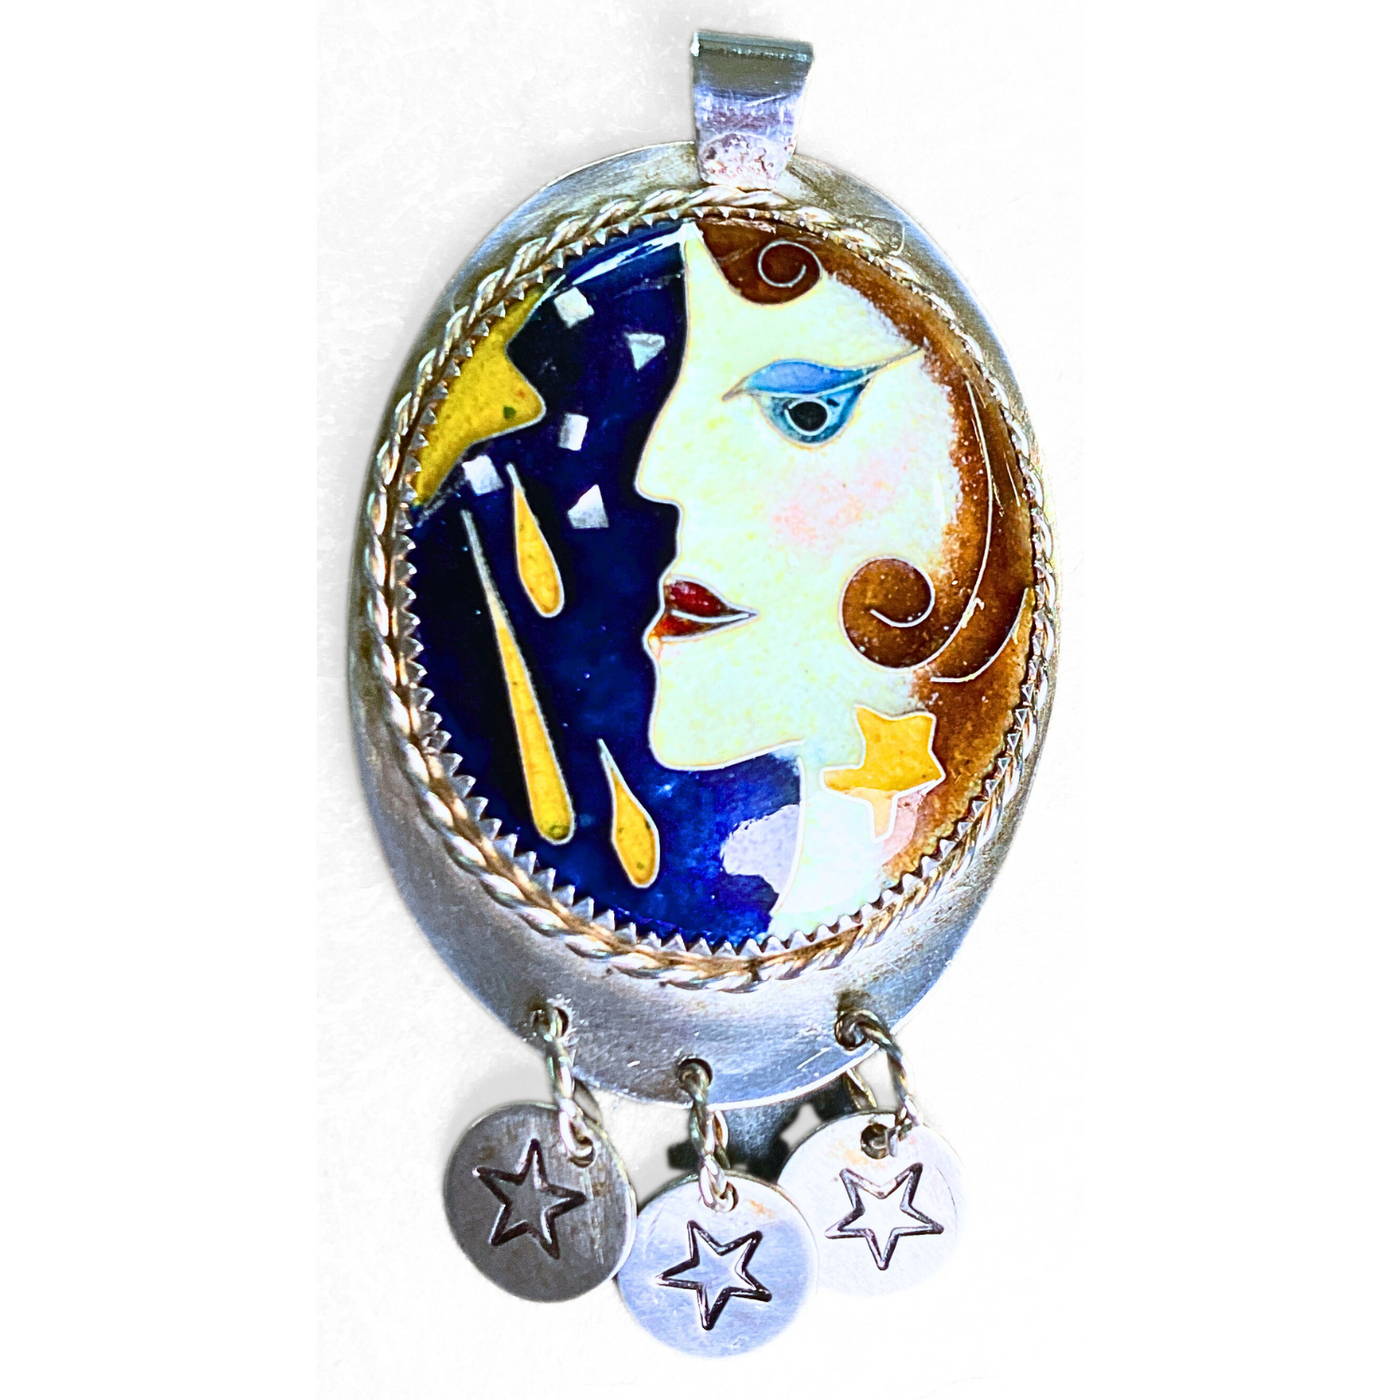 LEE-035 Cloisonne "Jane Leno with Stars"